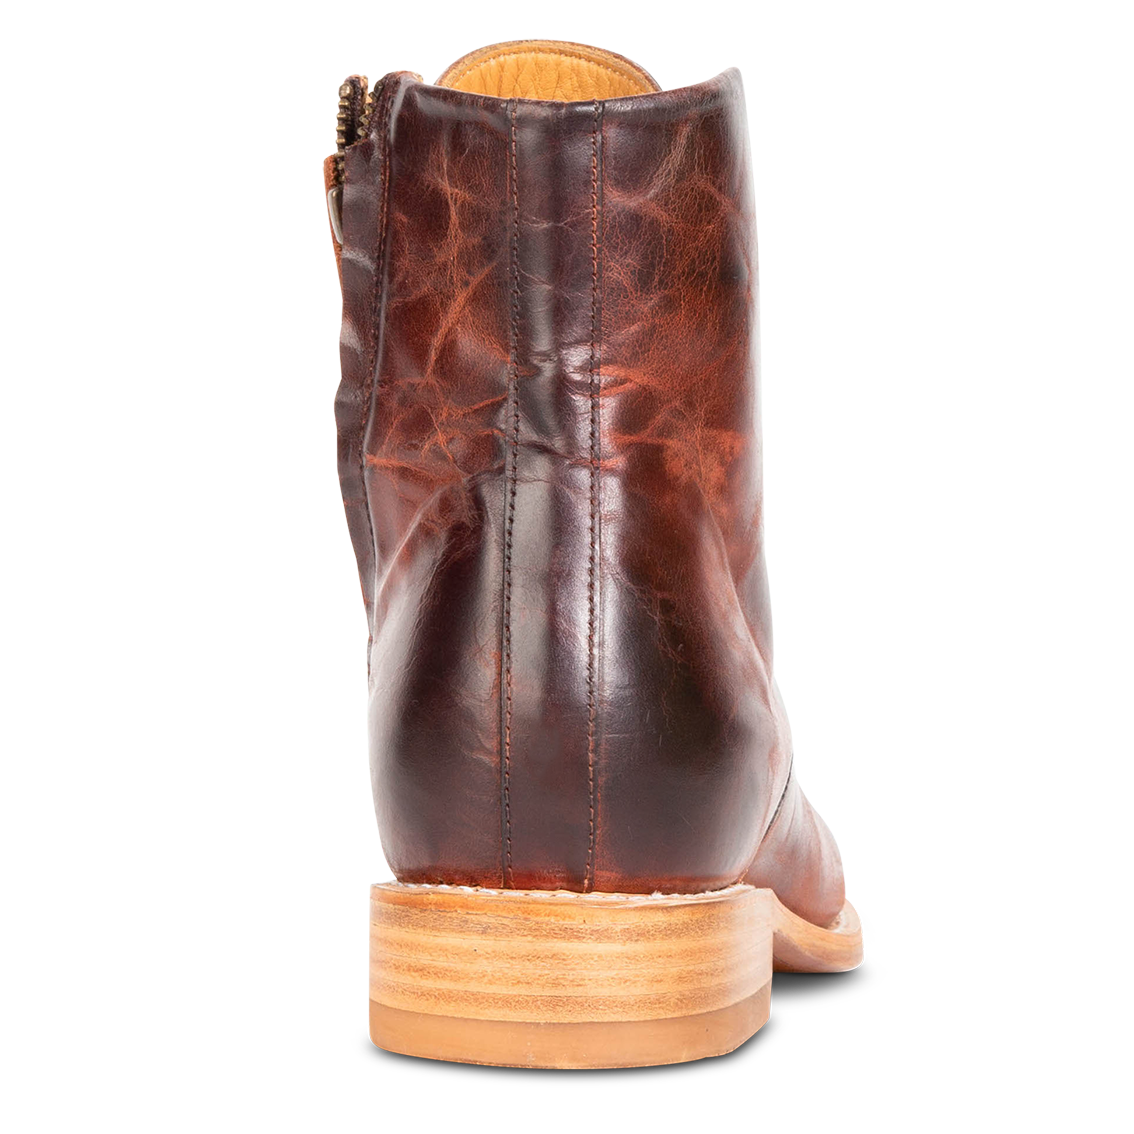 Back view showing low heel on FREEBIRD men's Paxton cognac ankle boot